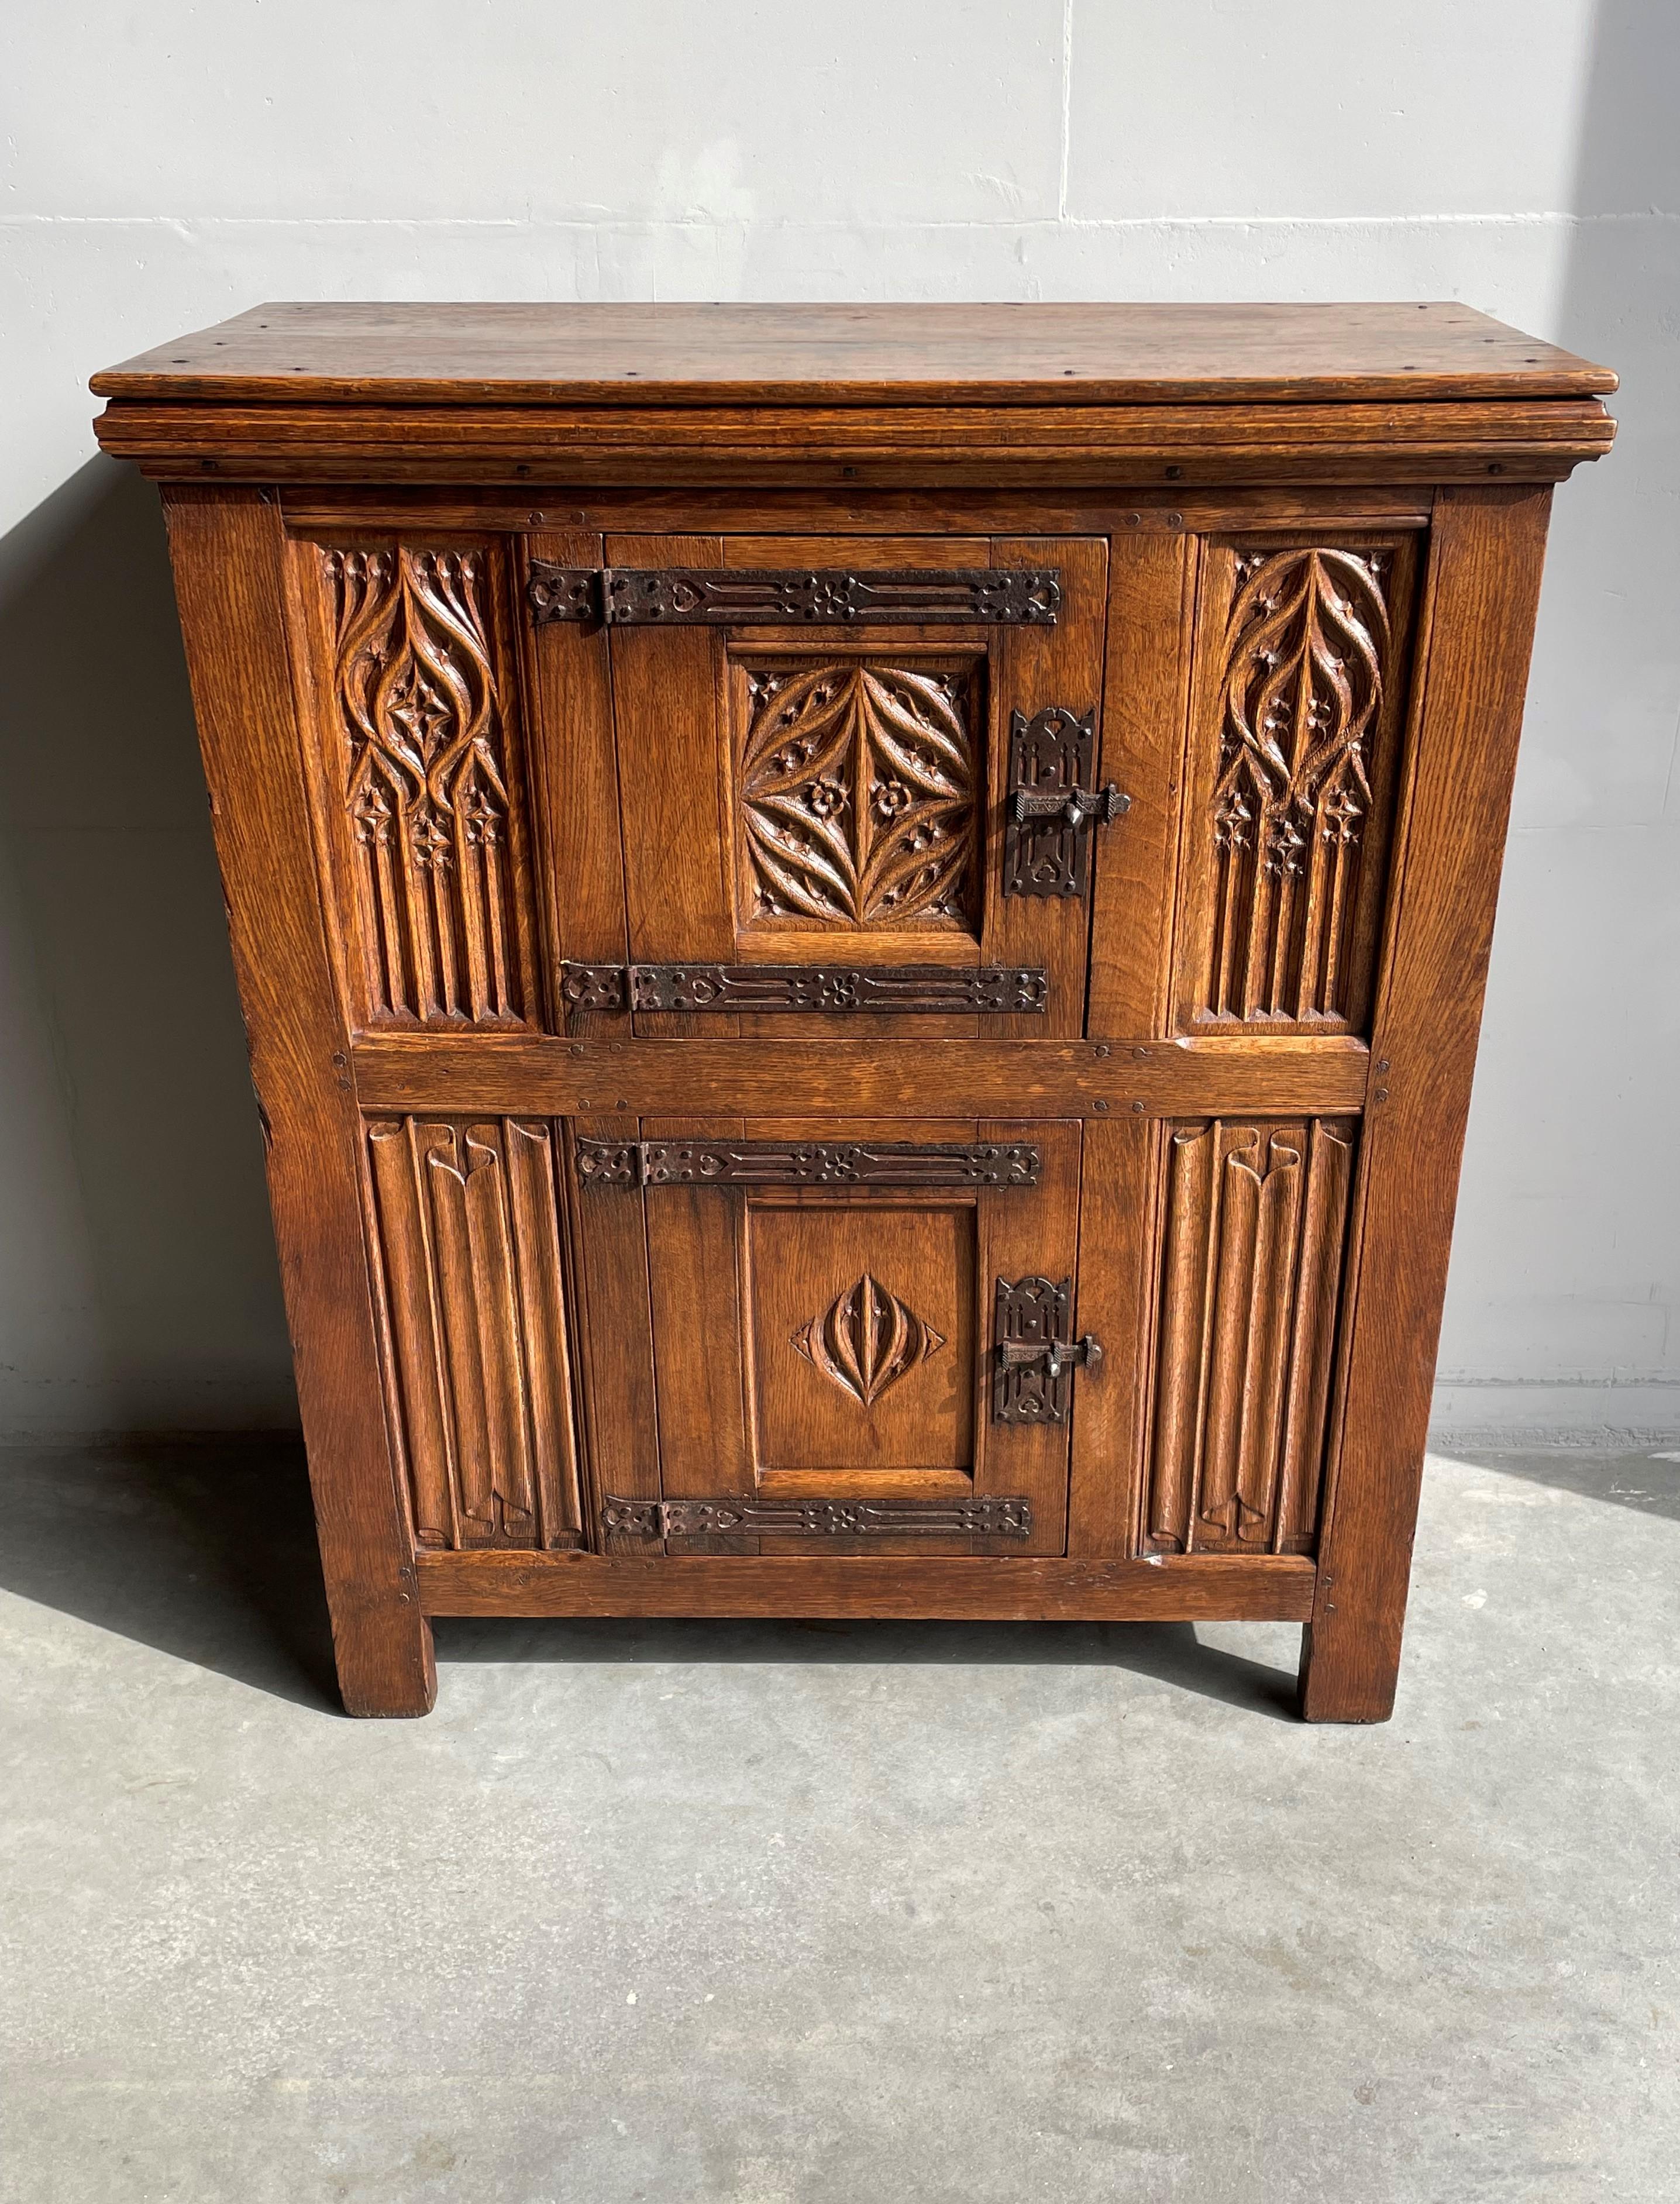 Marvelous and practical Gothic Revival cabinet from the early 1800s.

This rare, Dutch workmanship, Gothic Revival cabinet from the early 19th century for several reasons is another one of our recent great finds. First of all, this ecclesiastical